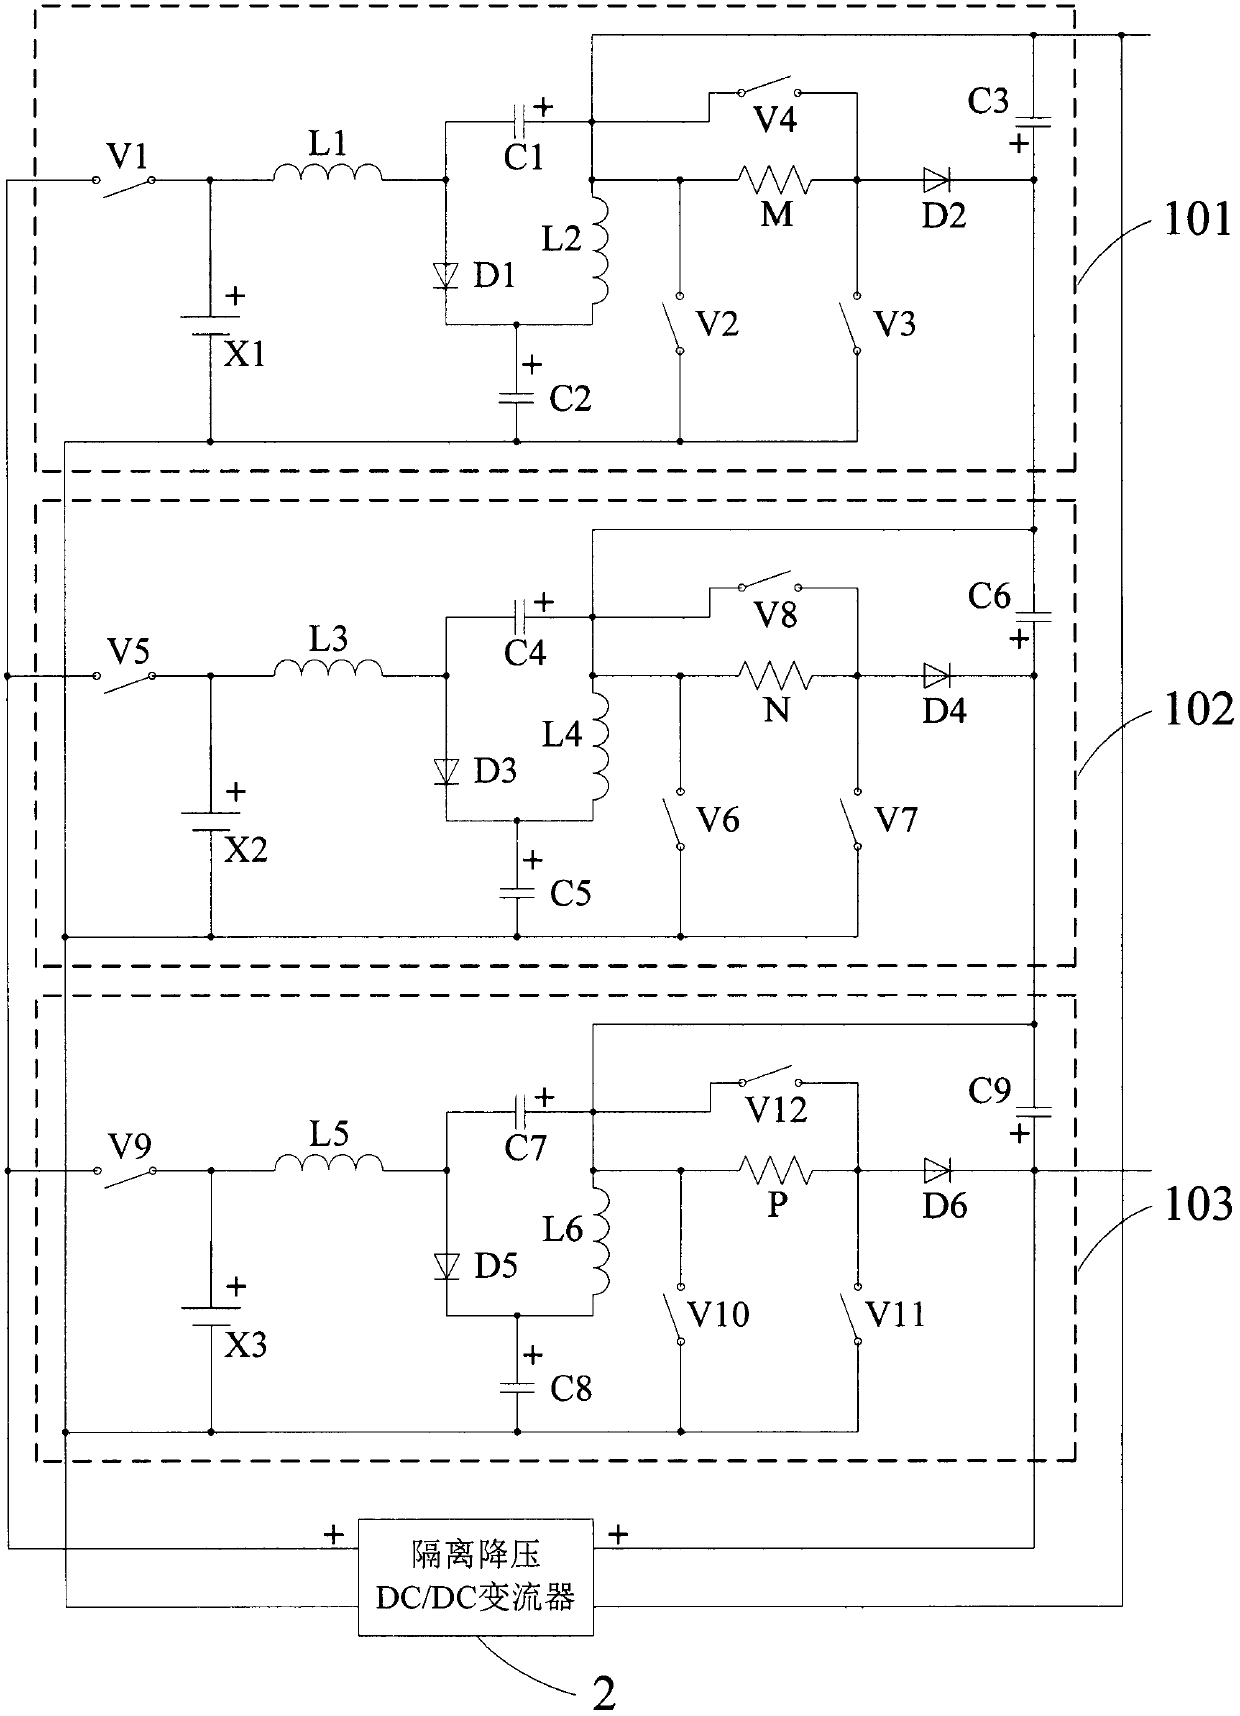 A self-energized high-voltage conversion system for switched reluctance generators